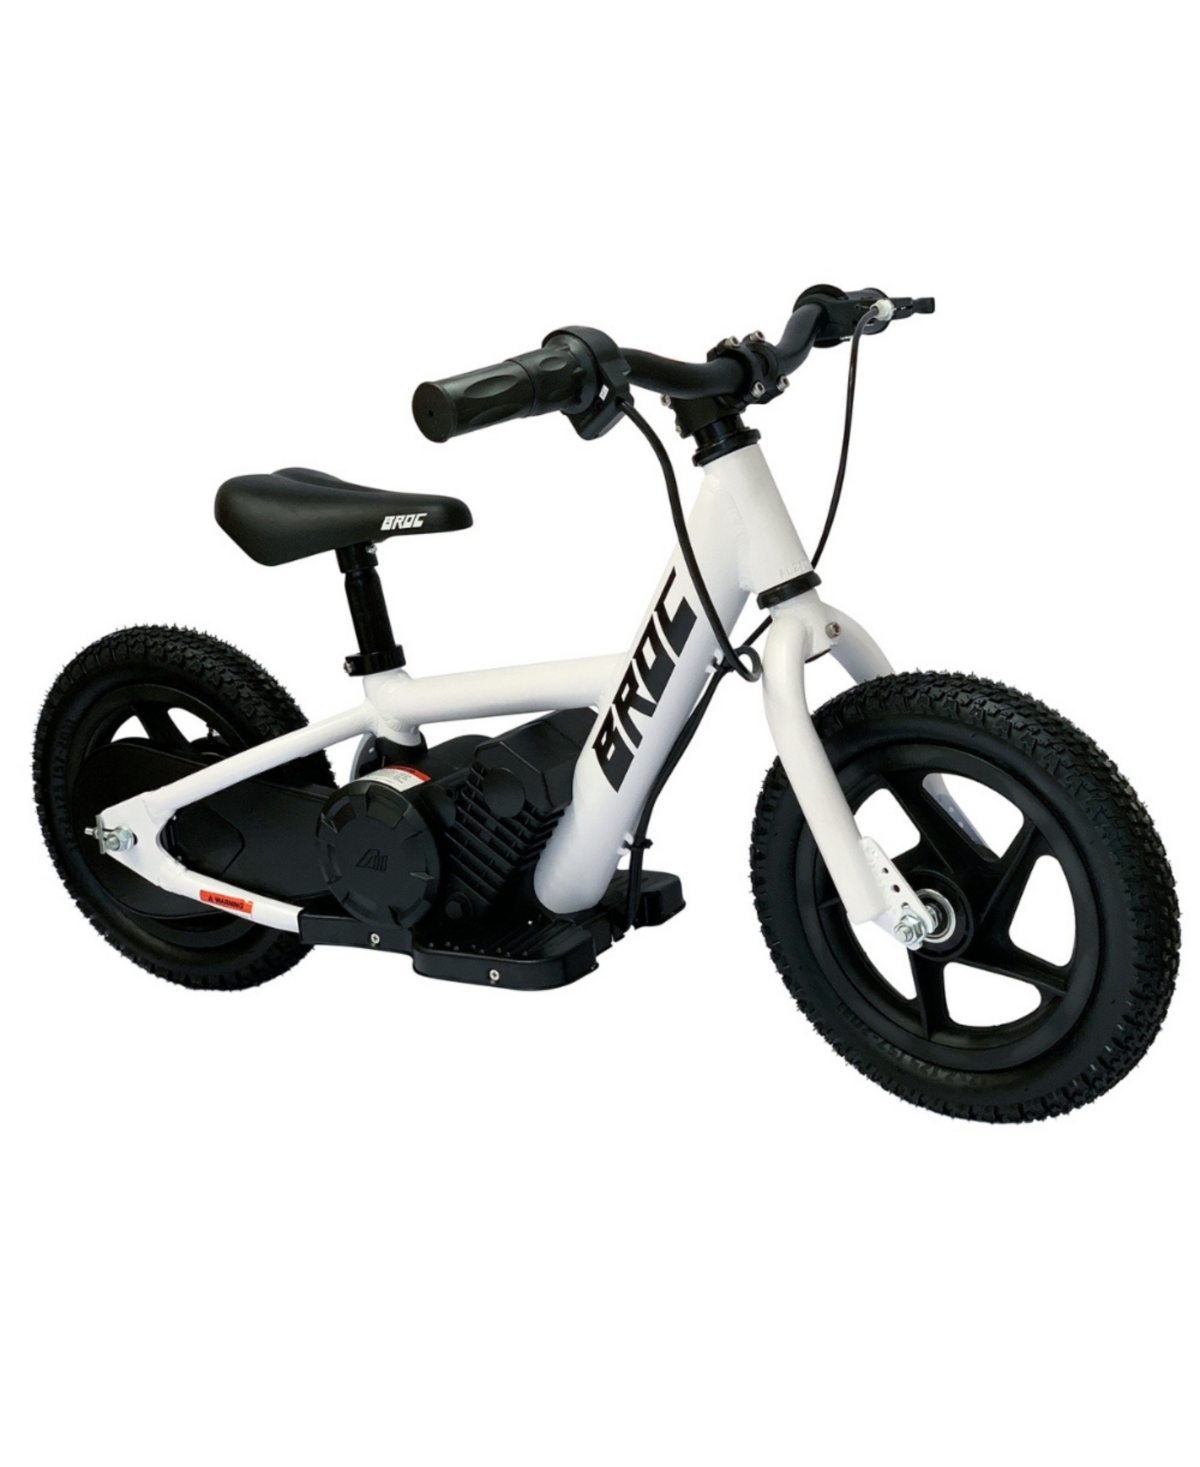 Shop Best Ride On Cars Broc Usa E-bikes D12 Powered Ride-on In White